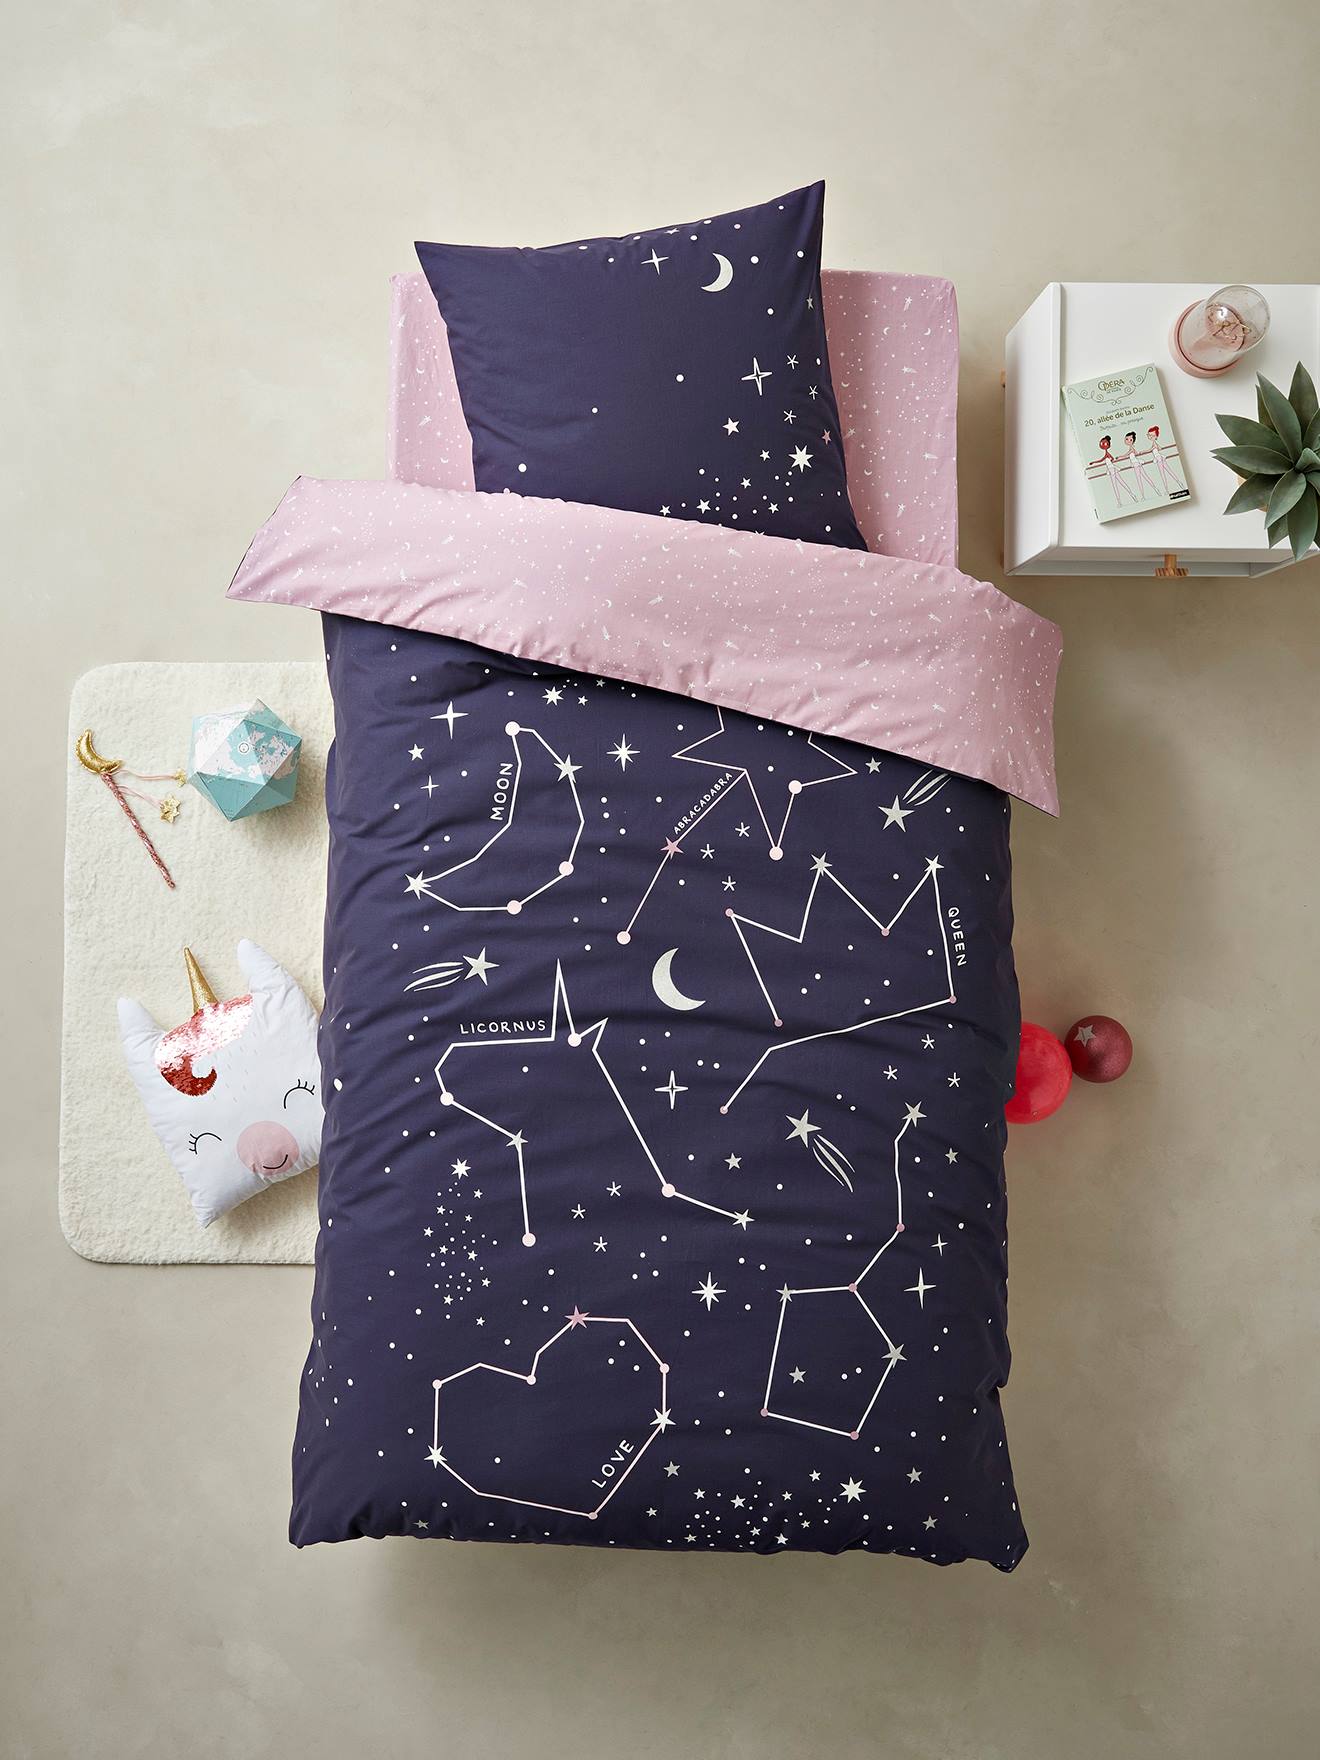 Duvet Cover Pillowcase Set With Glow, Glow In The Dark Space Duvet Set